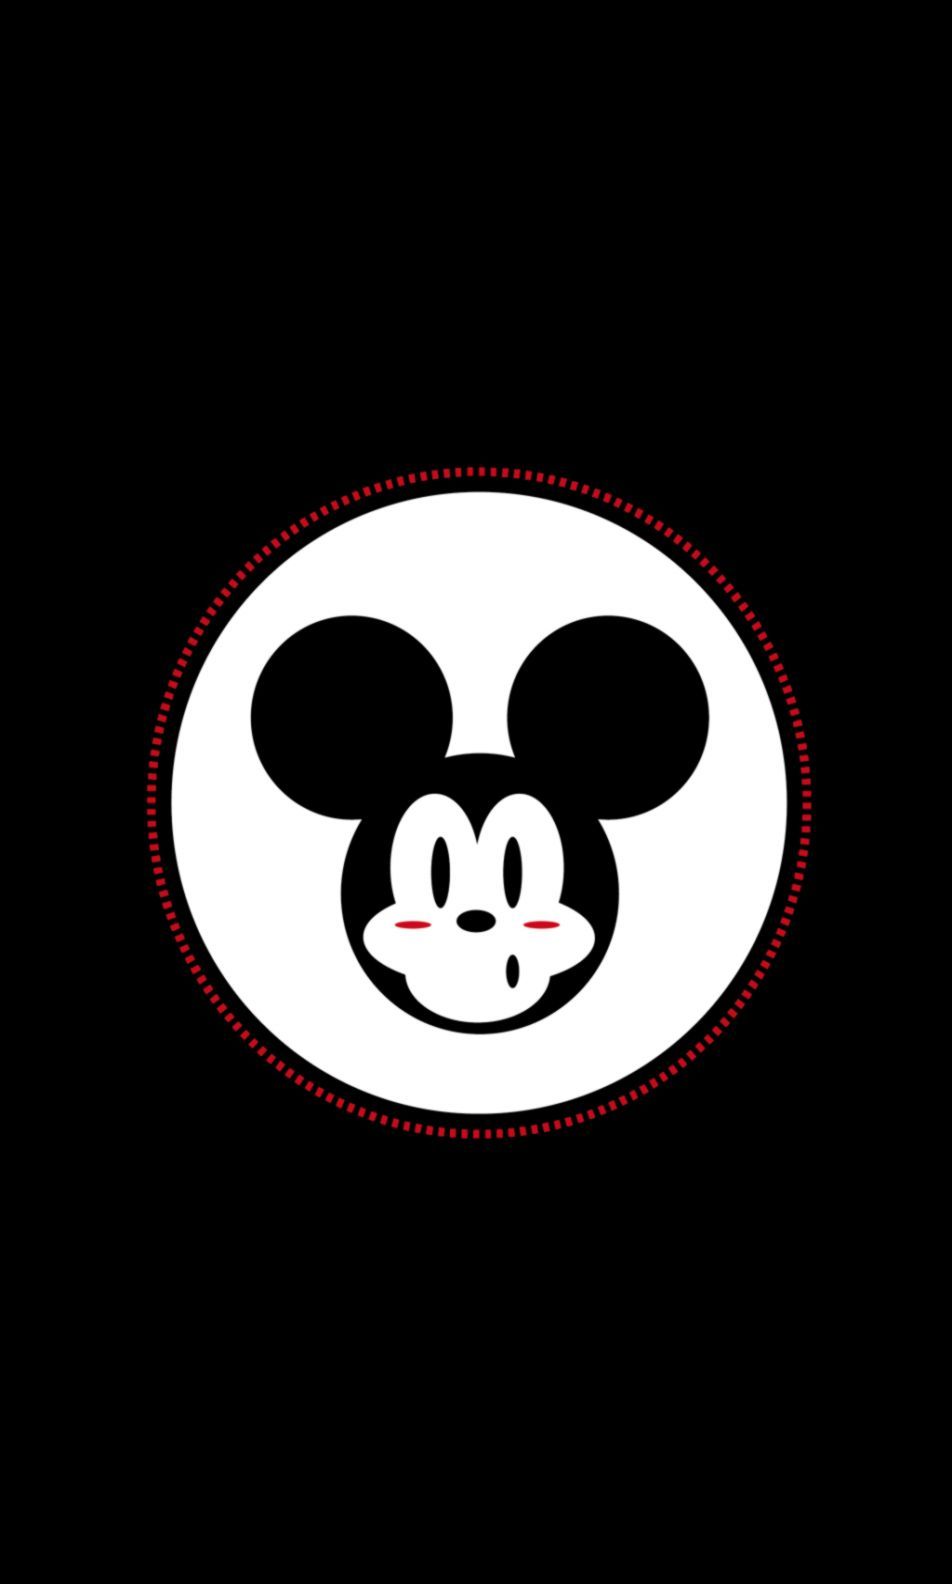 Micky Mouse Oh Boy Wallpapers